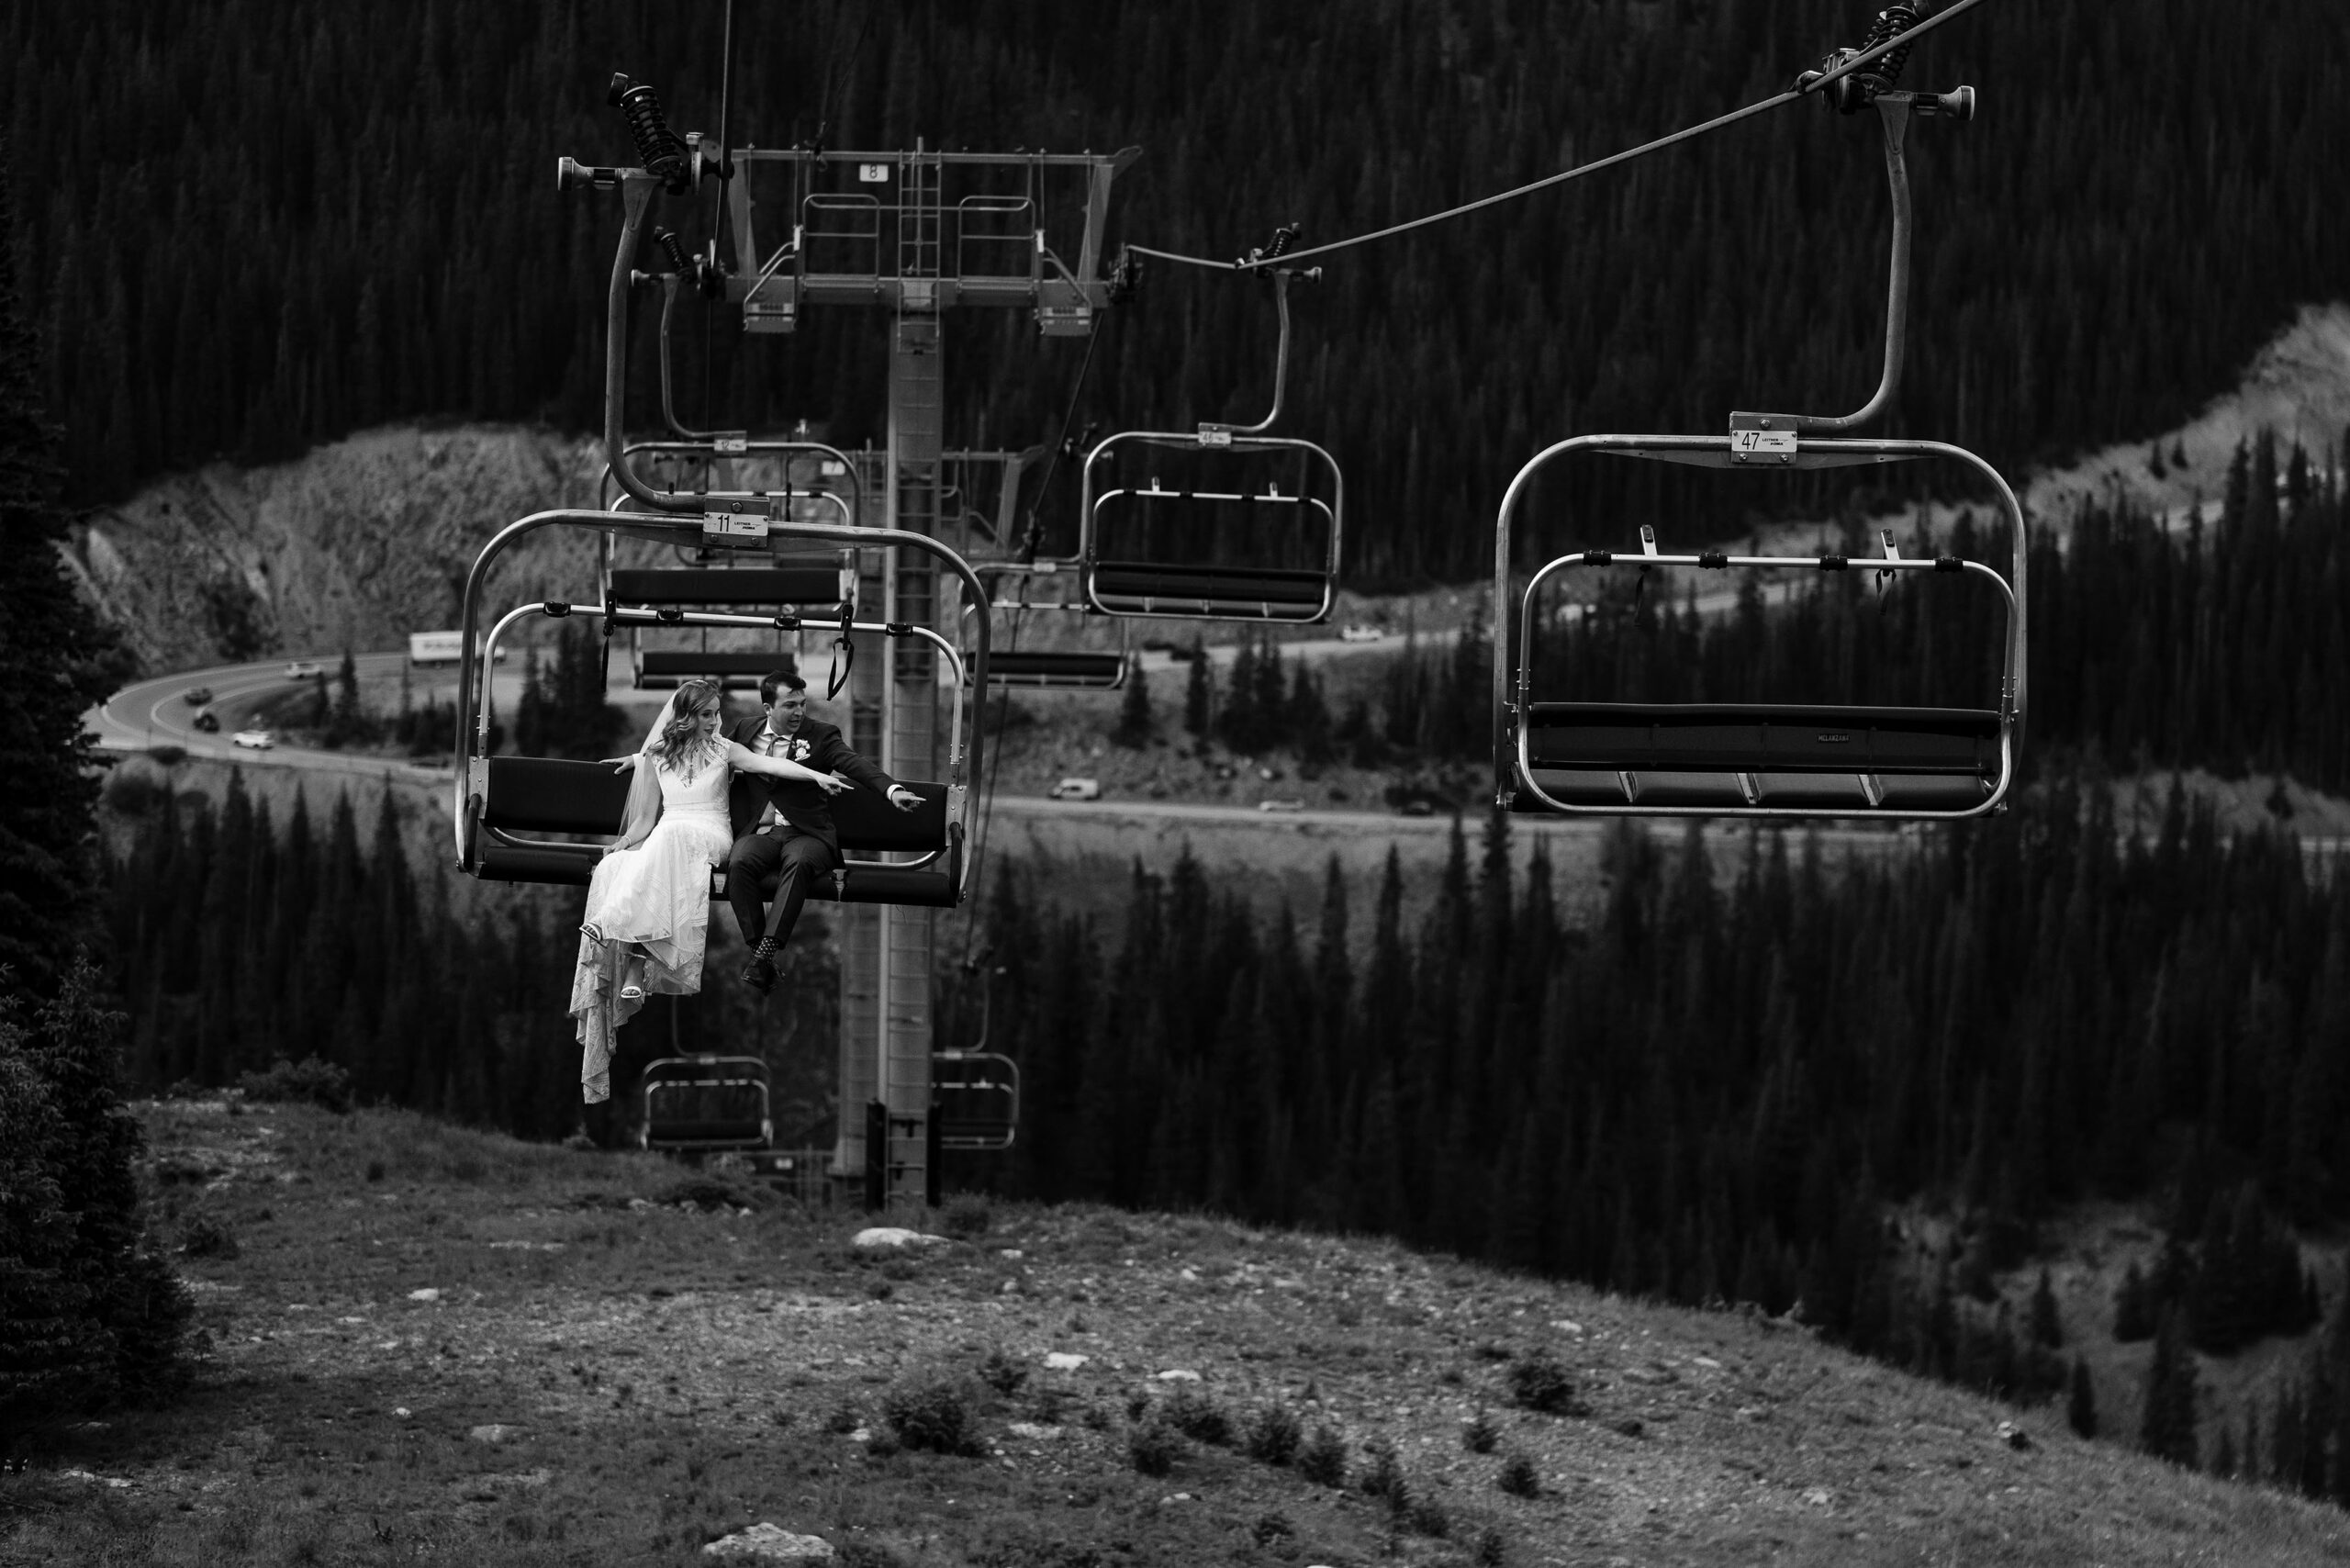 The bride and groom point to a deer while riding the chairlift